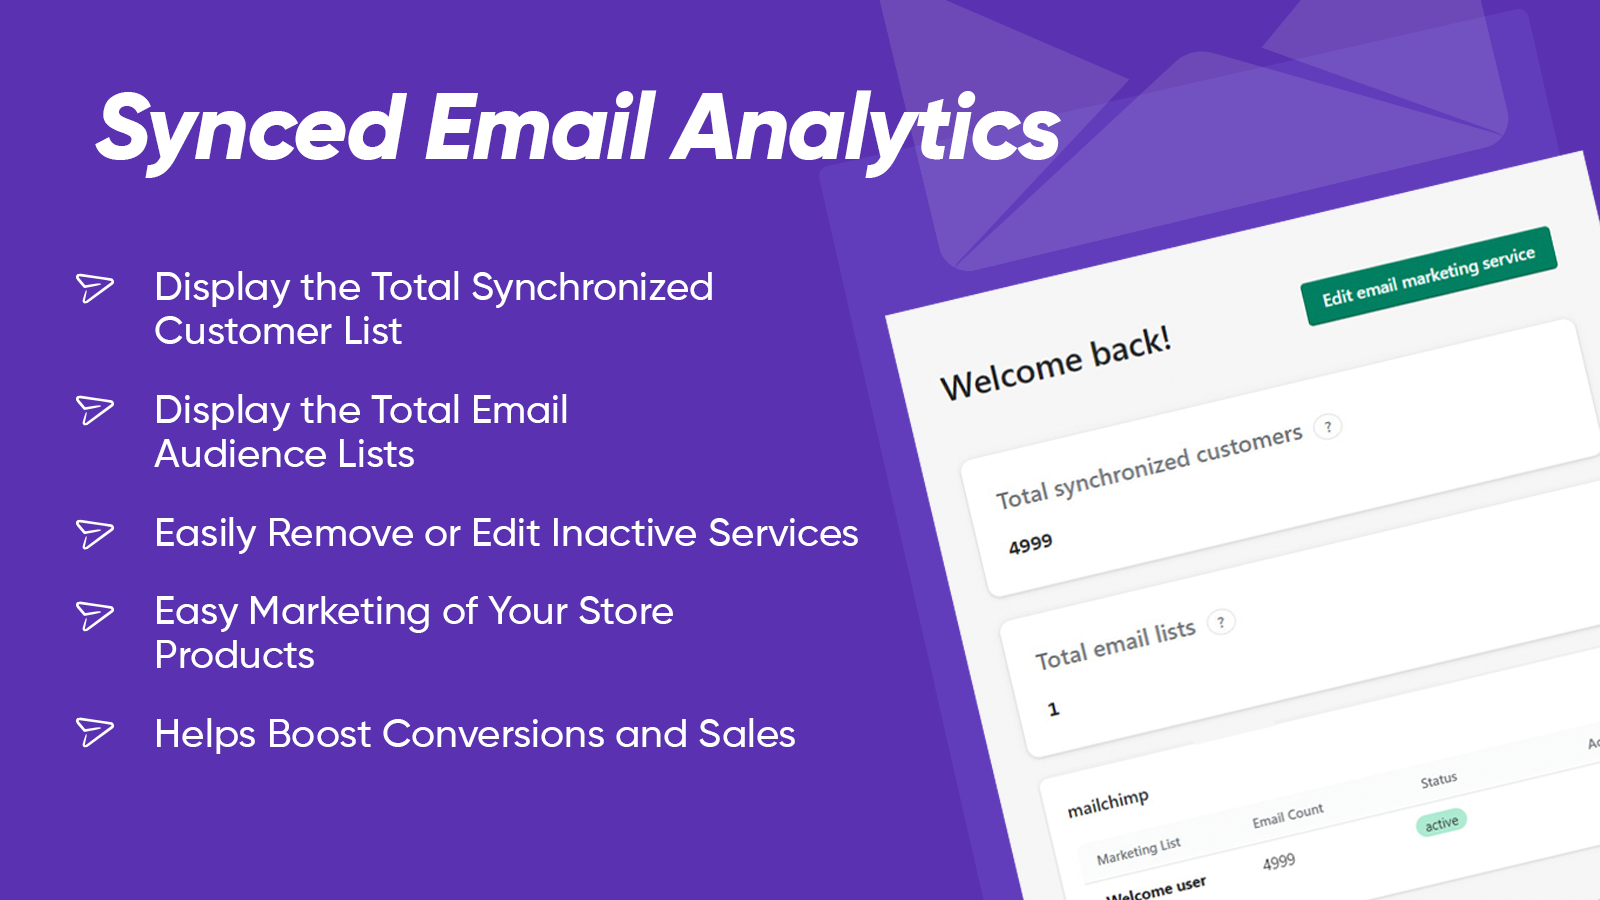 Synced Email Analytics